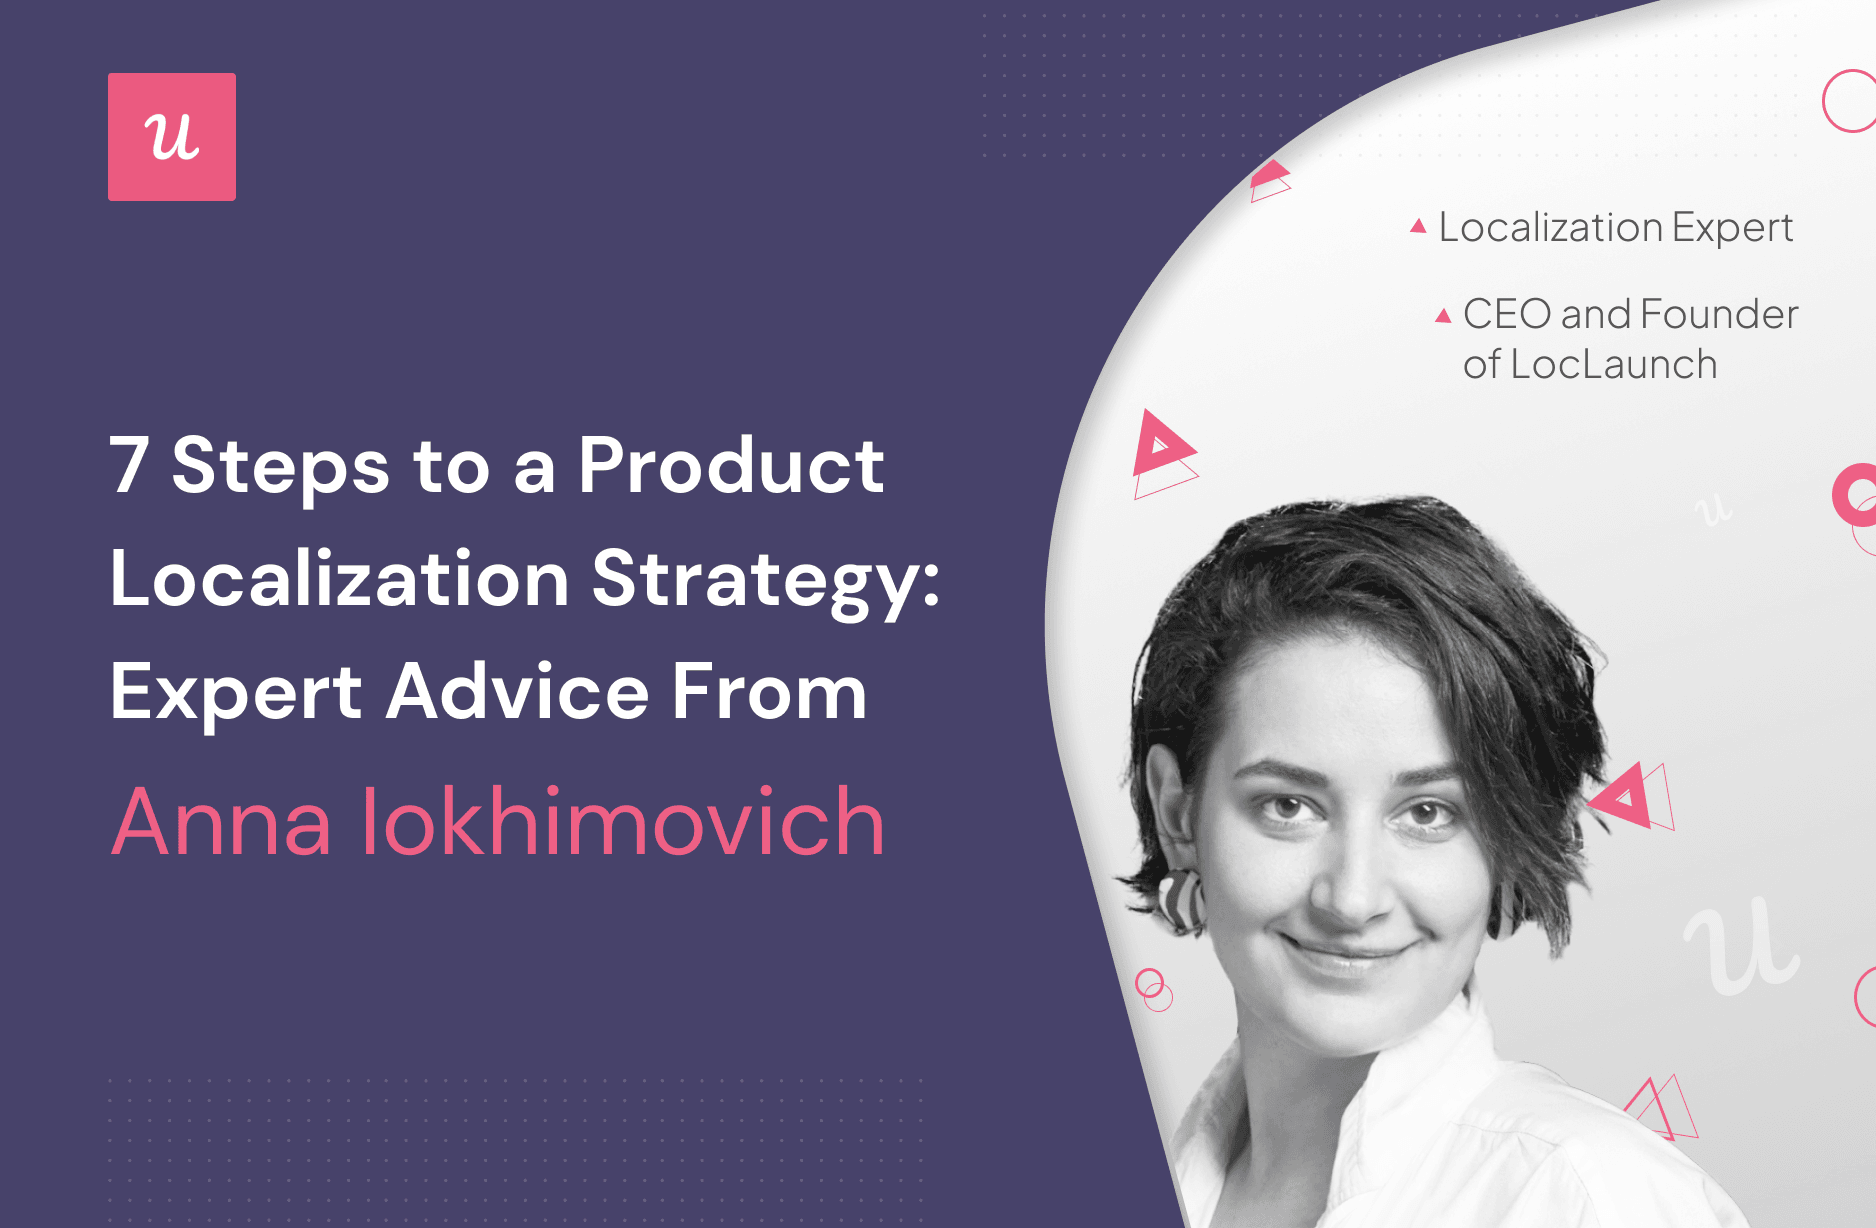 Product Localization Strategy in 7 Steps: Expert Advice From Anna Iokhimovich